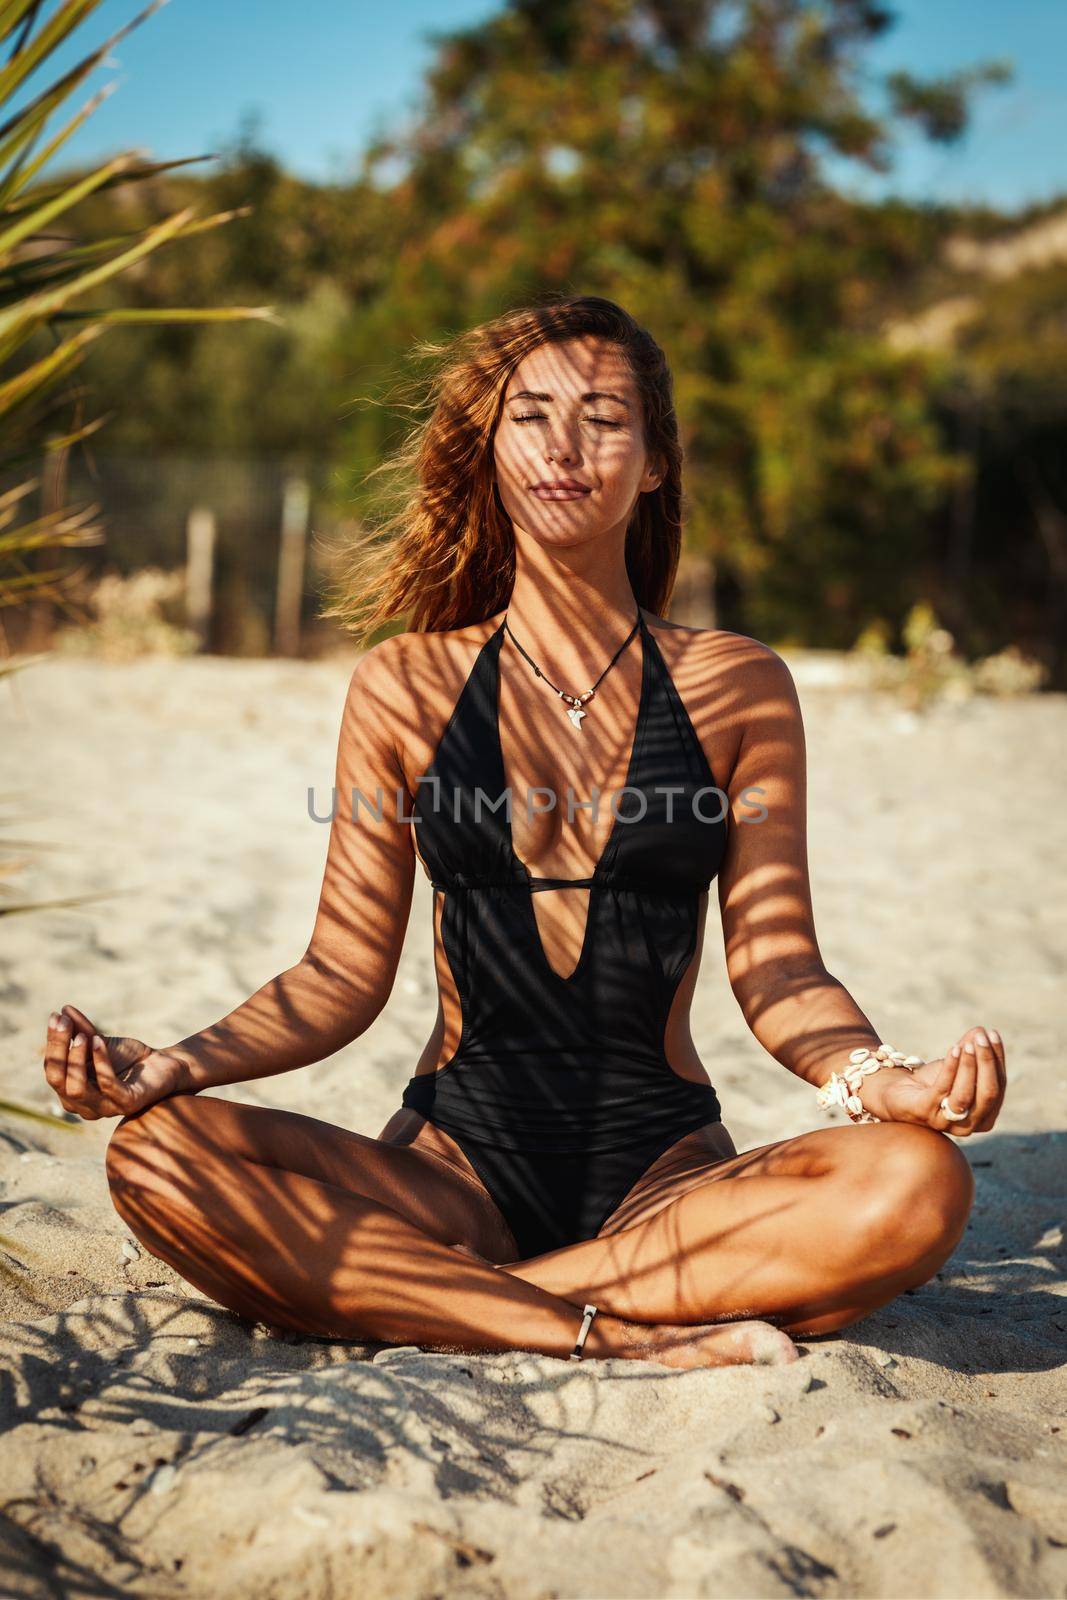 Attractive young woman is doing yoga and relaxing under the shade of a palm tree at the tropical beach.